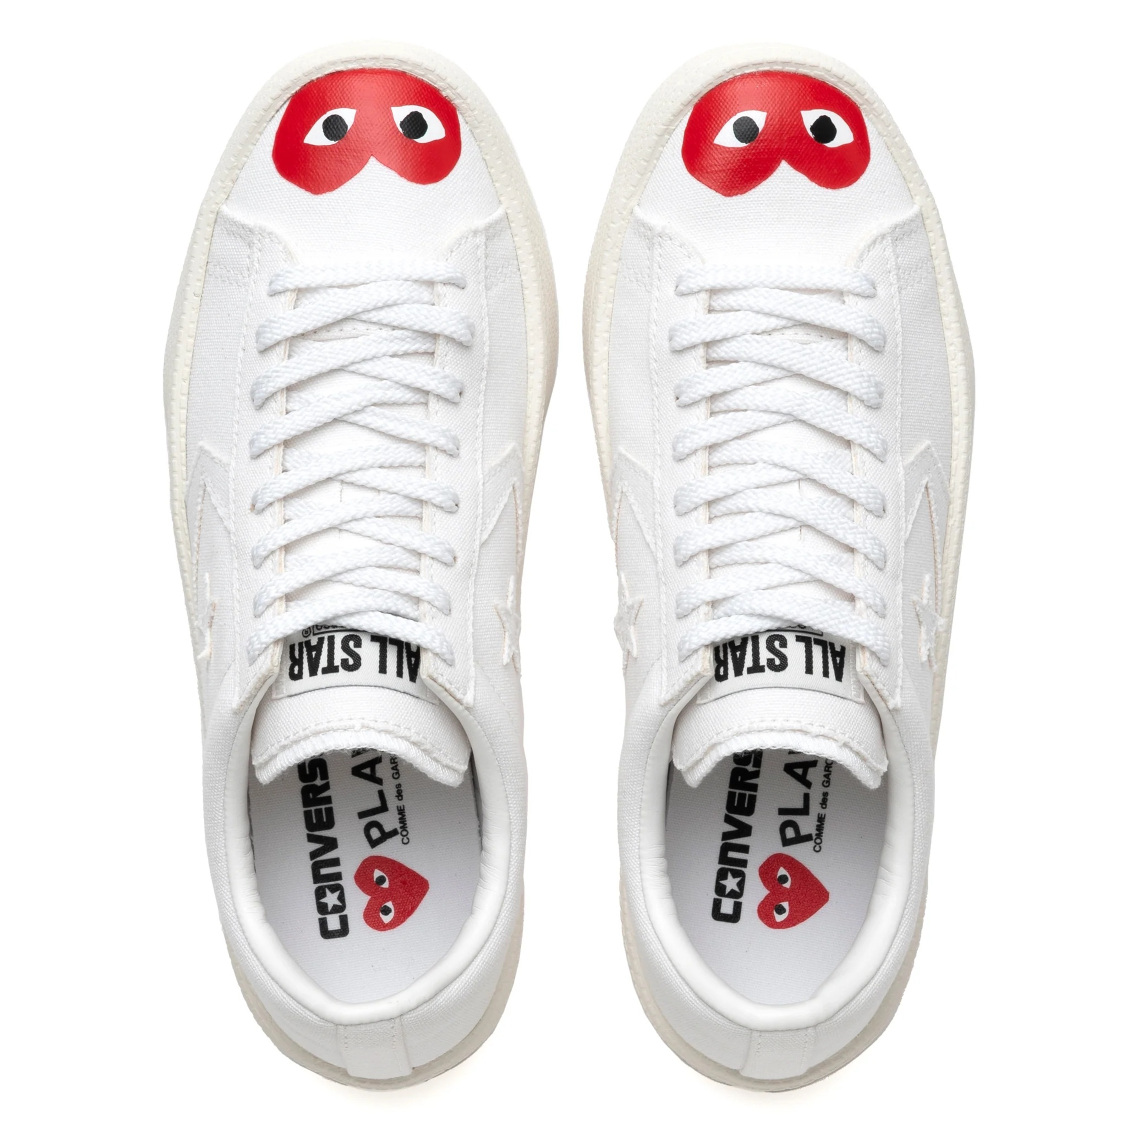 CdG PLAY Converse Pro Leather White 10